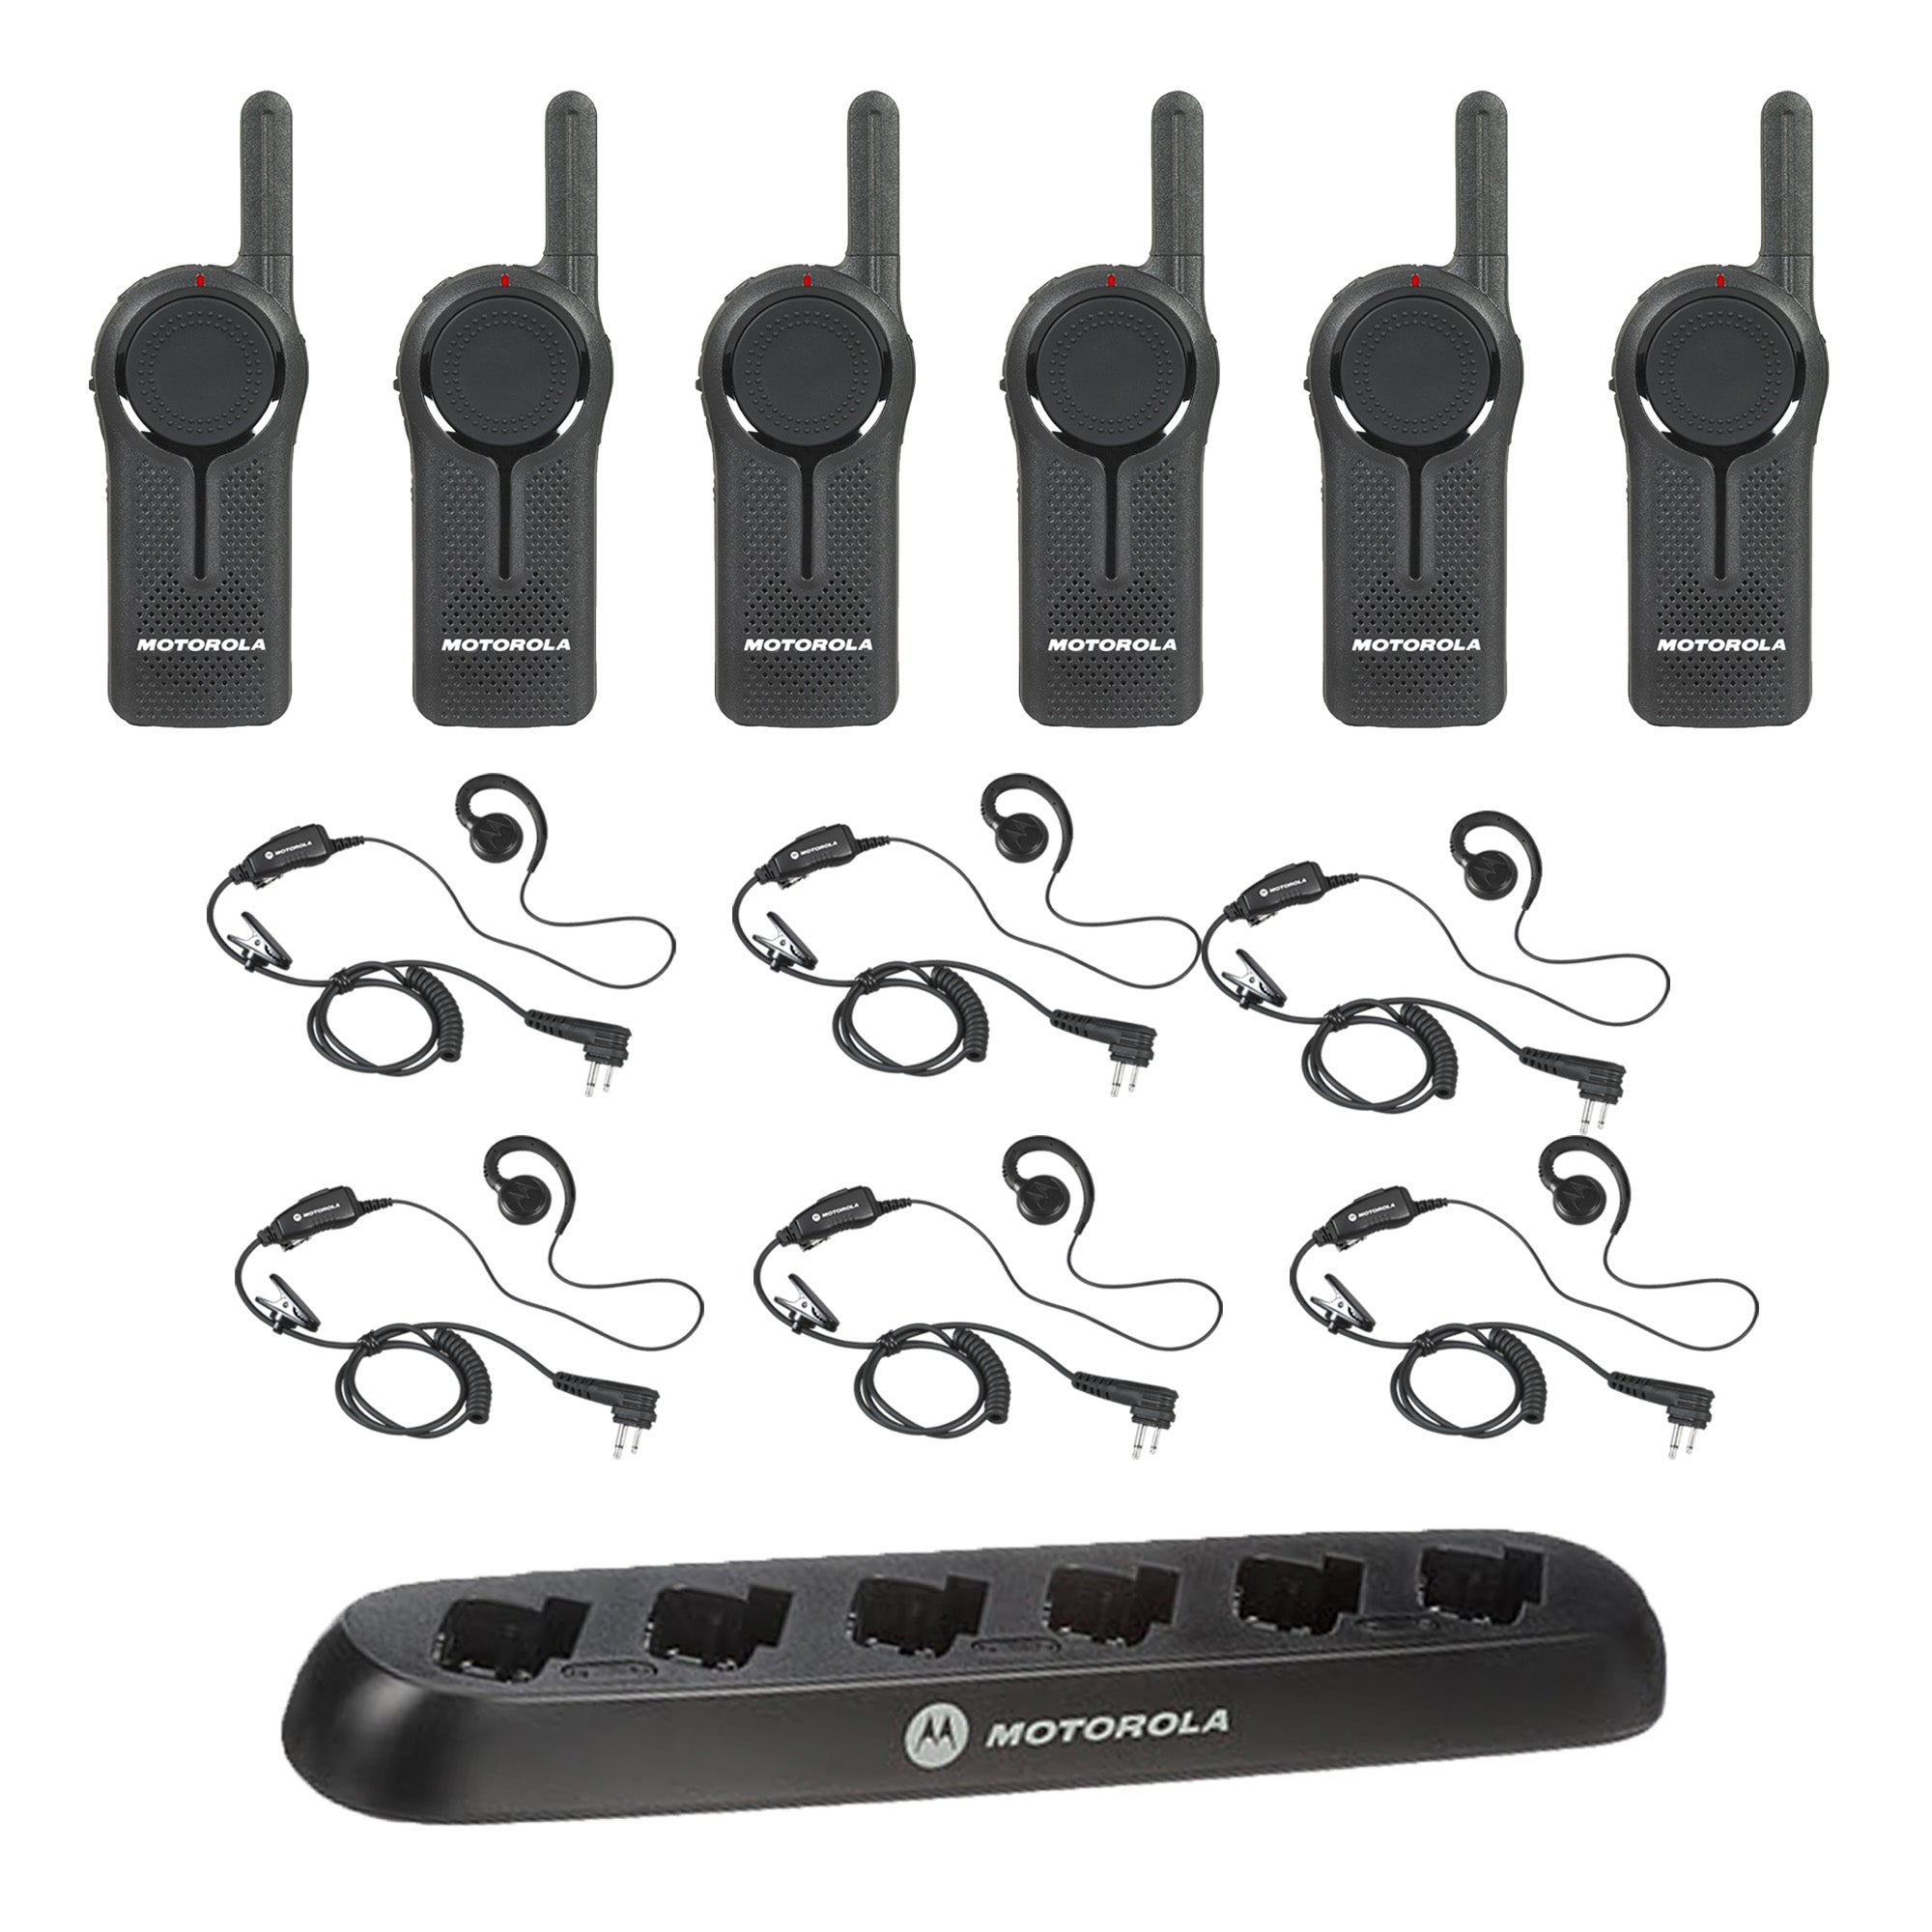 Motorola DLR1060 Pack Bundle with Multi-Unit Charger and Headsets|  TwoWayRadioGear